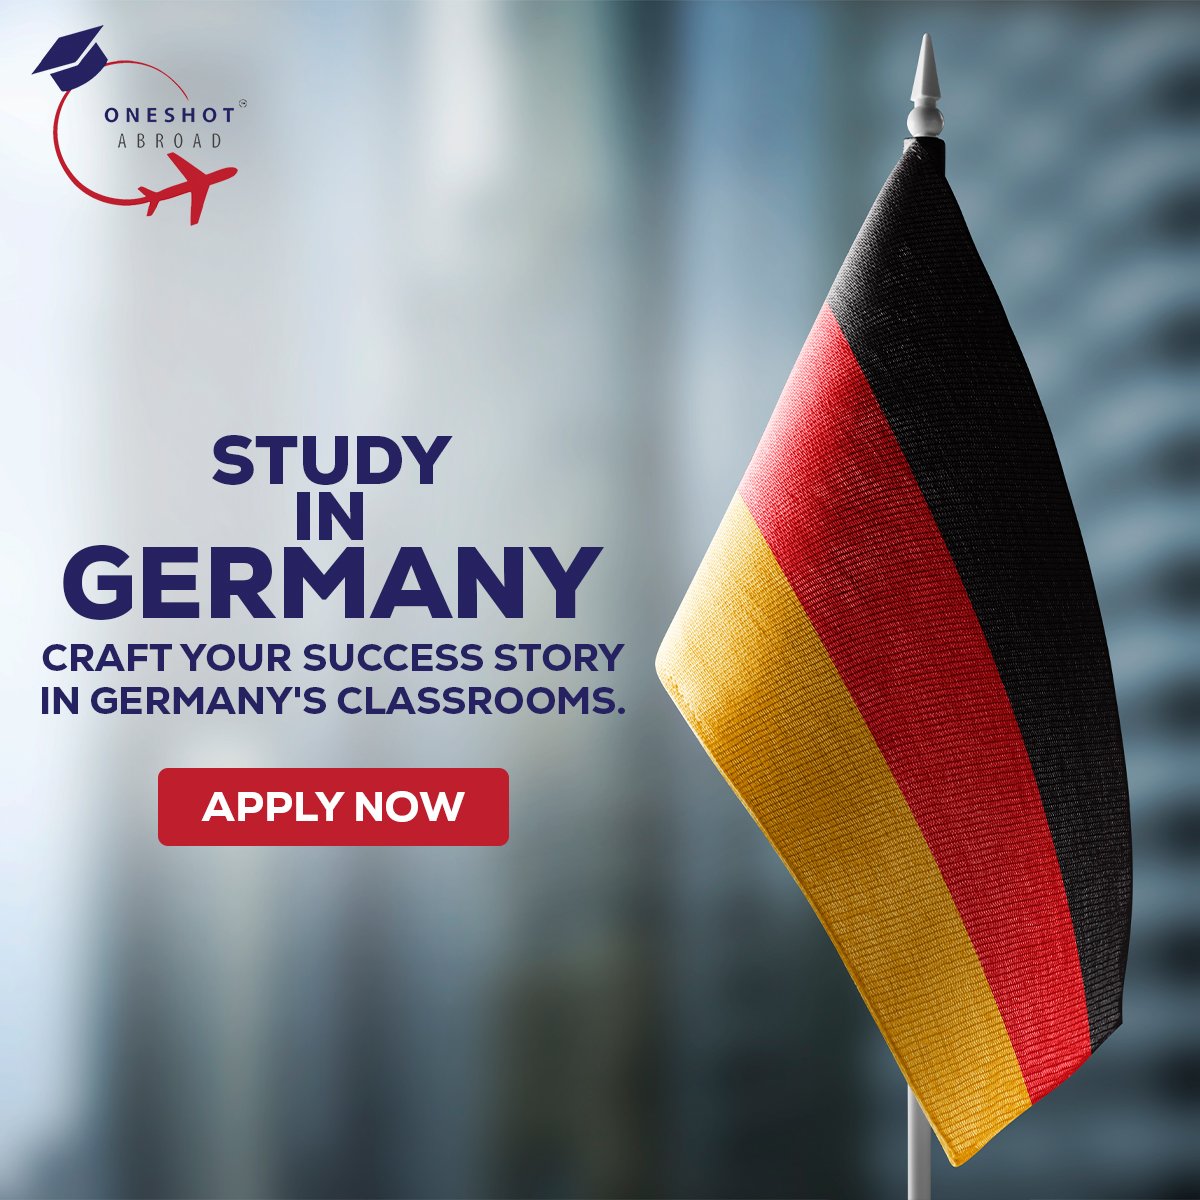 Beyond Borders, Beyond Boundaries.
Germany, Your Global Classroom Awaits!
2024 Admissions Open!
#studyingermany #studyabroad #studyabroadconsultants #studyabroadlife #expertcounselling #expertcounsellor #germanyworkvisa #germandegree #student #studentvisa #university #germany🇩🇪